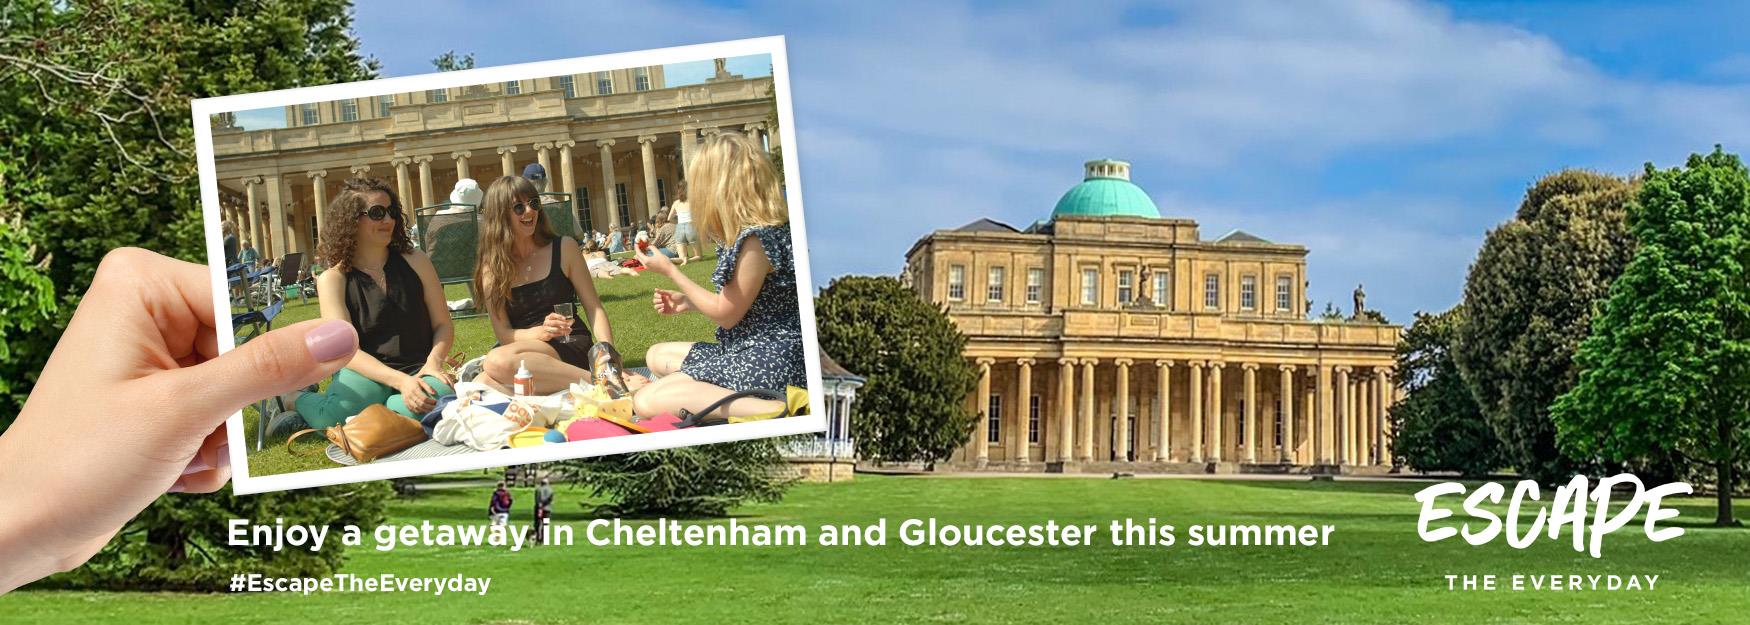 Escape the Everyday with a staycation in Cheltenham and Gloucester this summer